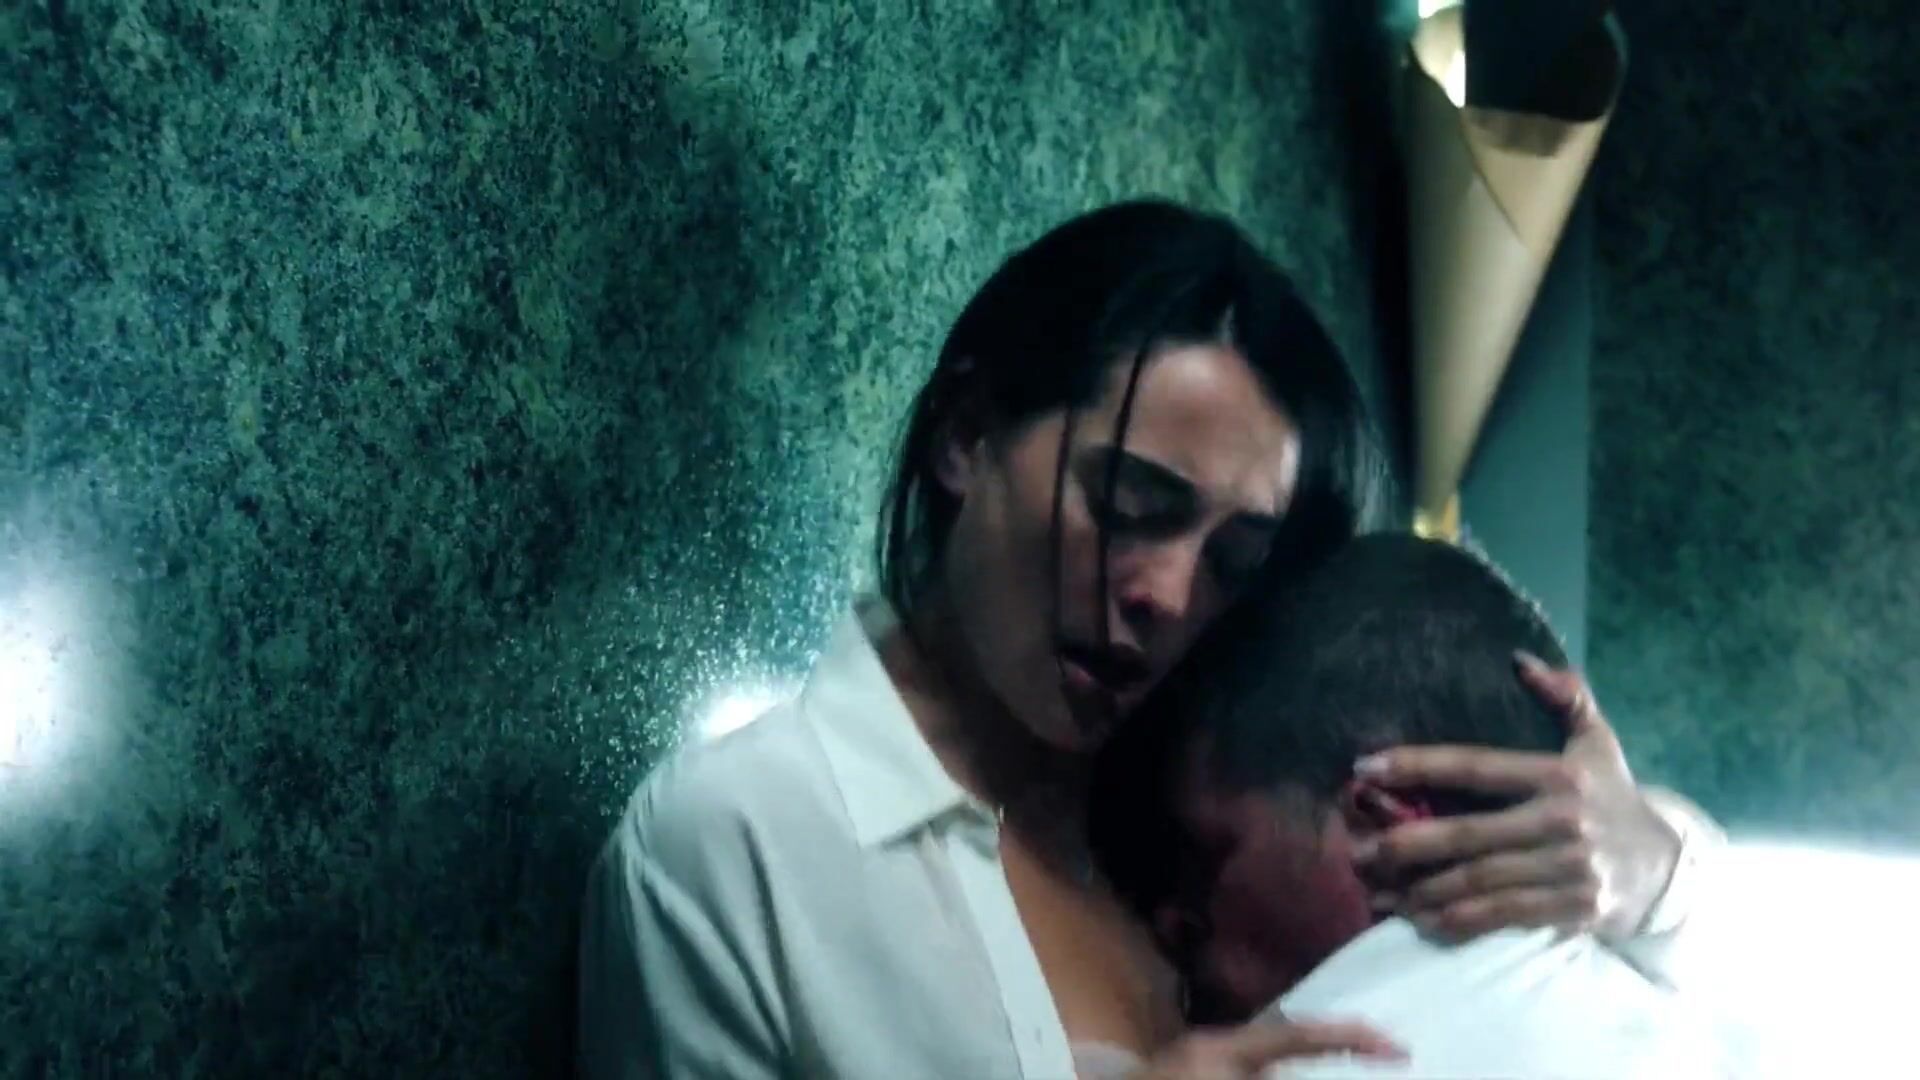 Hardcore Man entices Natalie Martinez and finally hooks up with her in elevator in Into the Dark HotMovs - 2